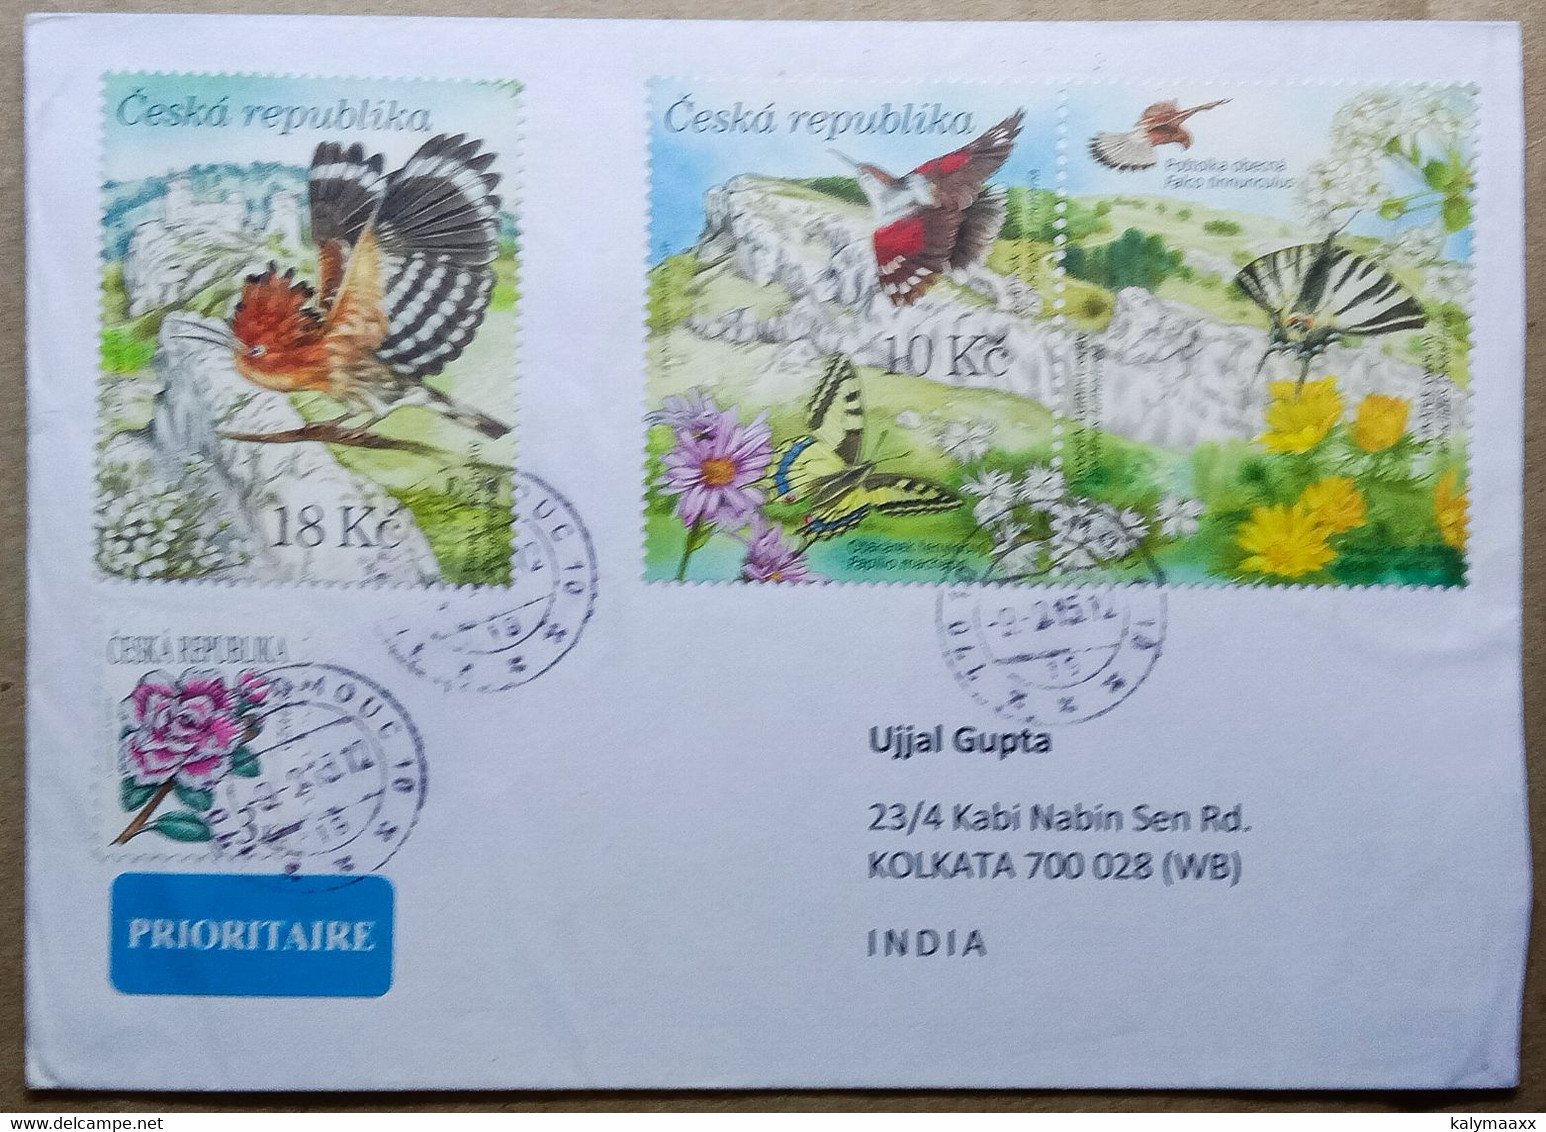 CZECH REPUBLIC TO INDIA 2012 COMMERCIAL USED COVER, BIRDS, BUTTERFLY, FLOWERS, FLORA & FAUNA - Covers & Documents